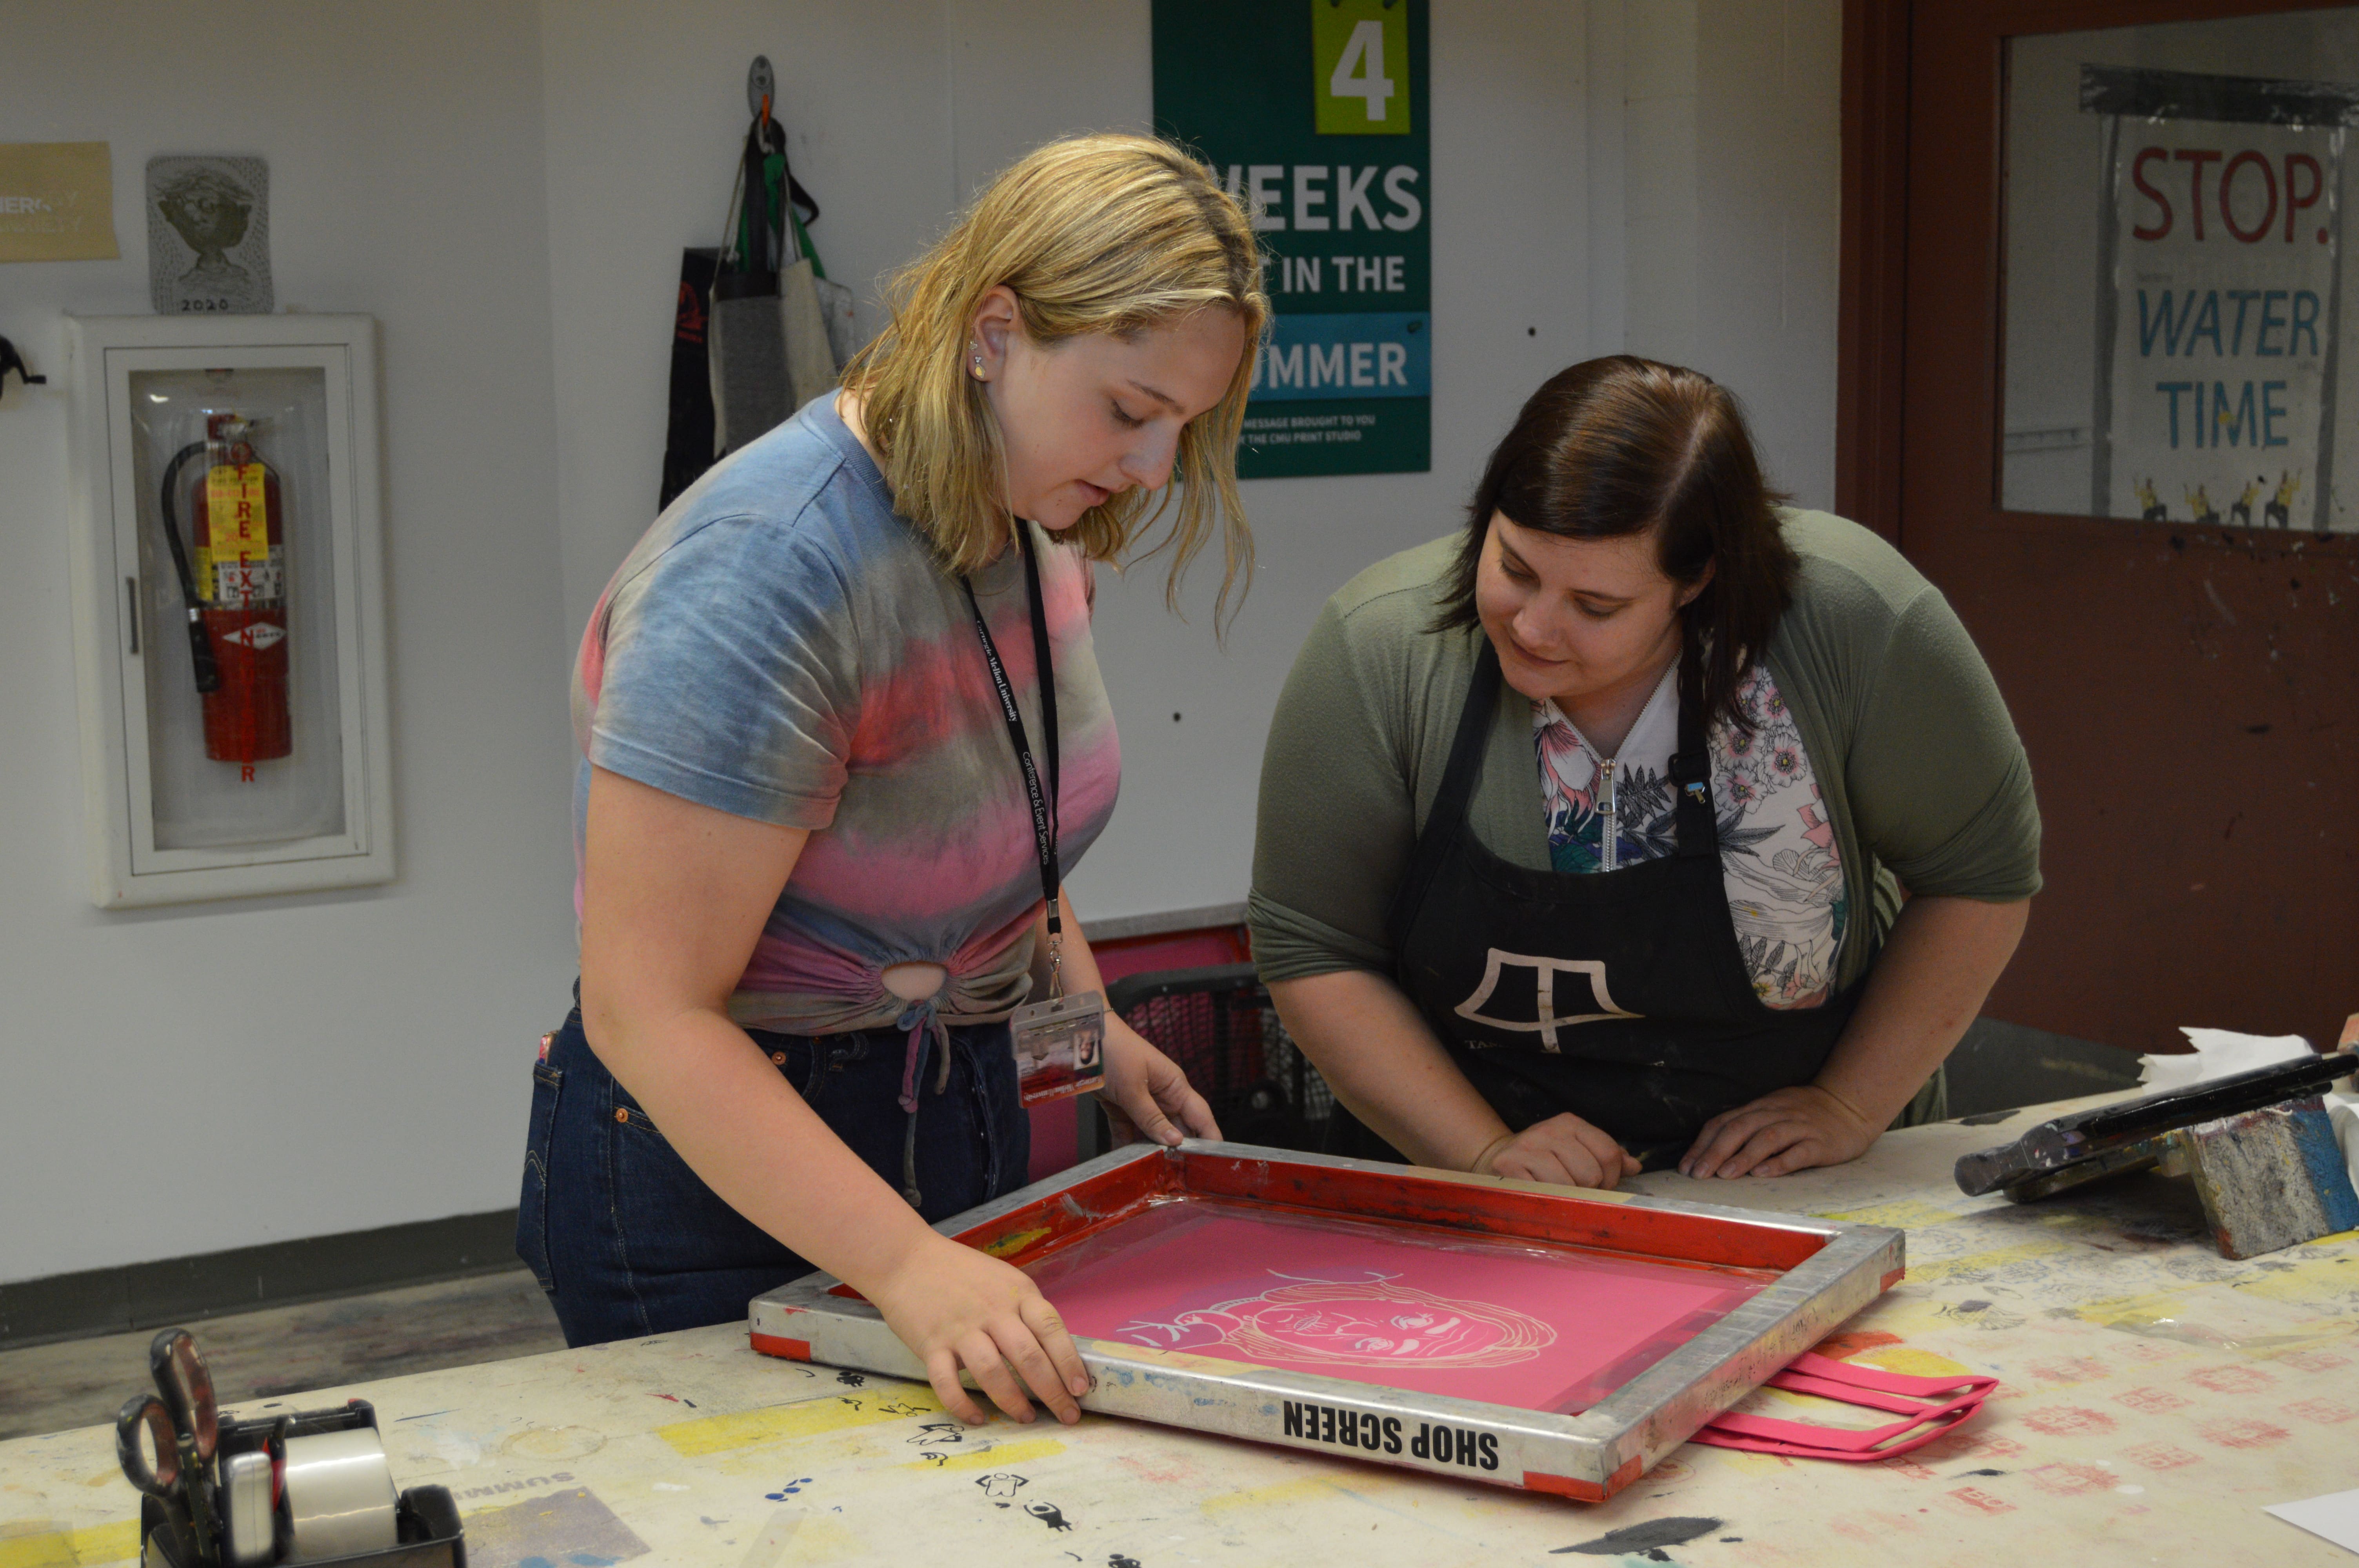 Student and teacher working on screen printing in an art studio